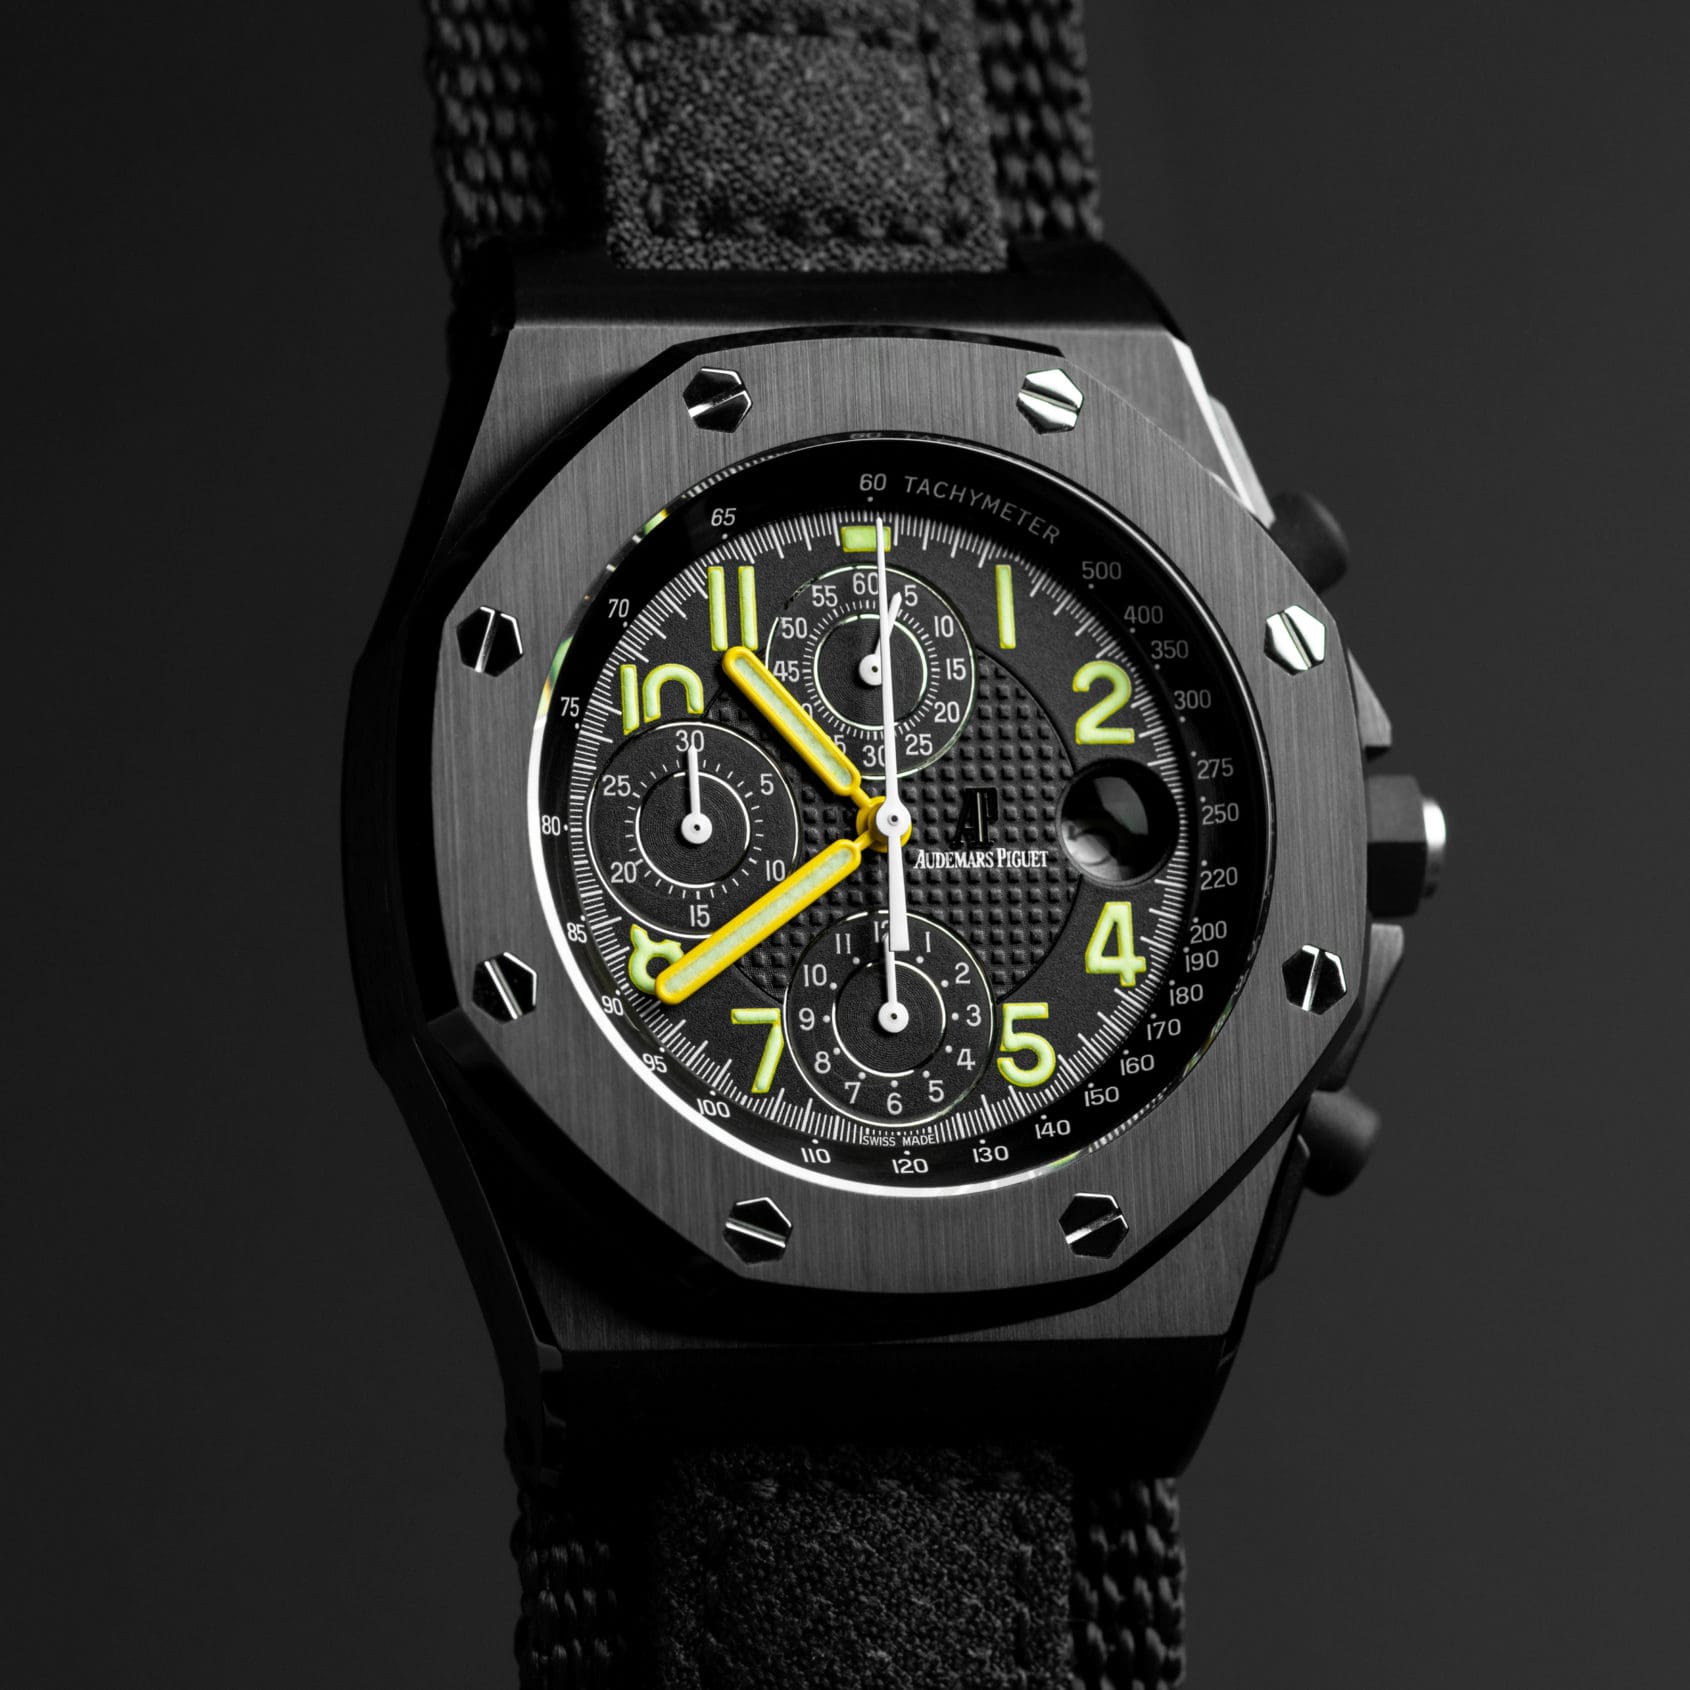 Finding beauty in the beast: A brief history of the Audemars Piguet Royal Oak Offshore